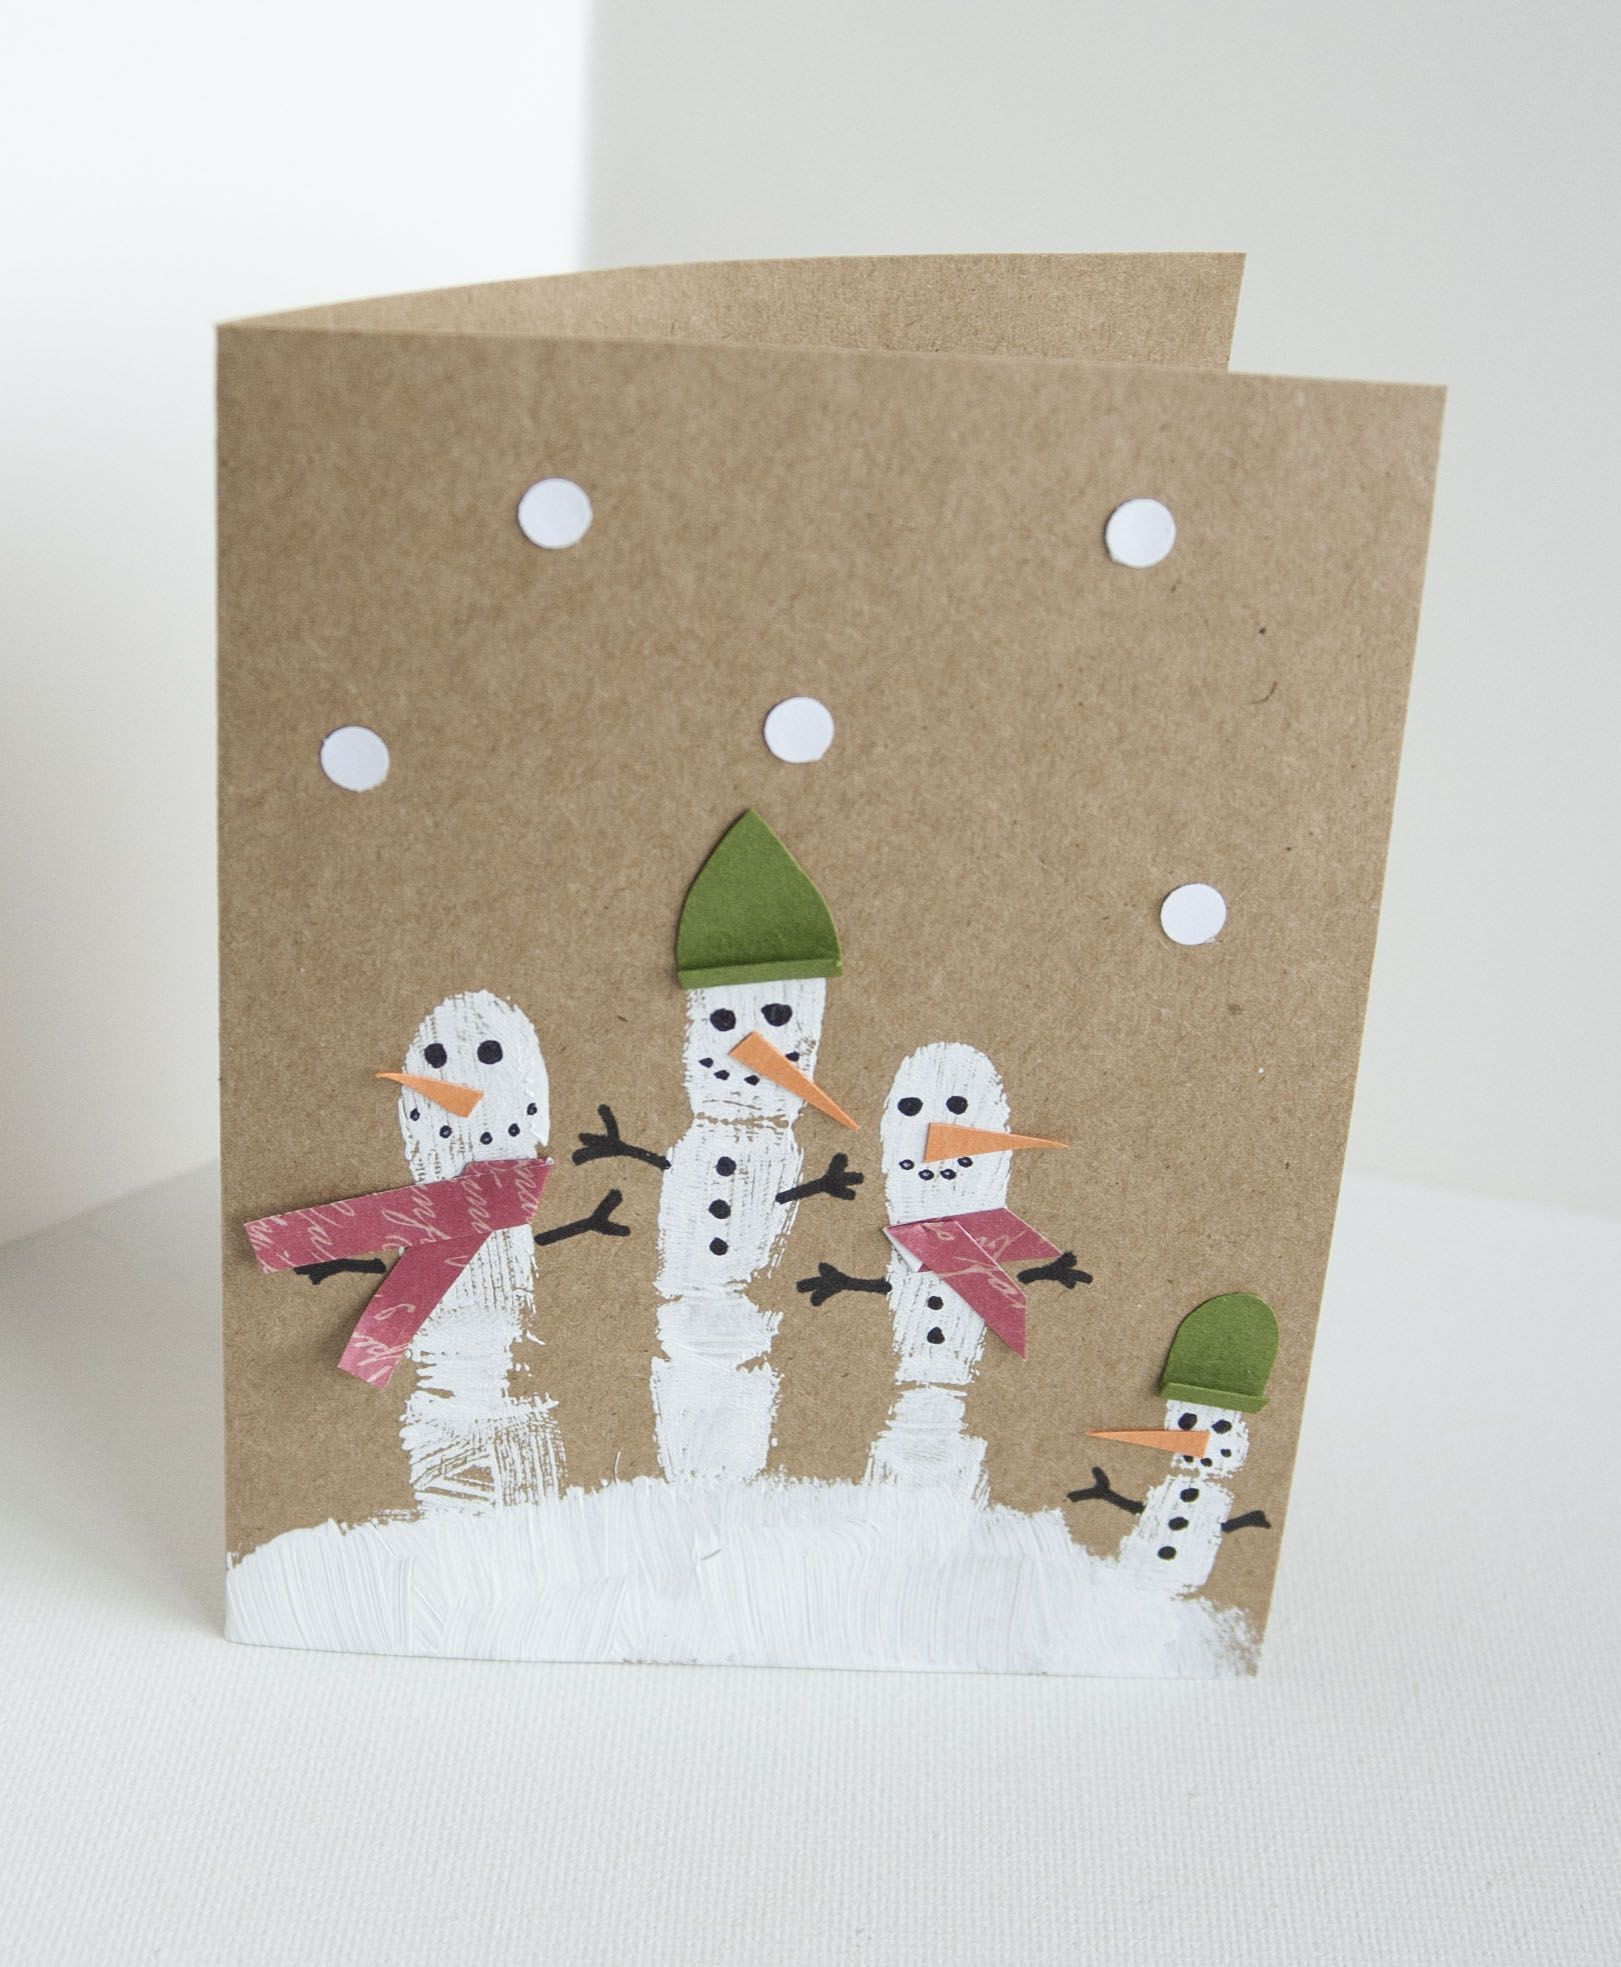 DIY Christmas Cards For Kids
 15 Awesome Christmas Cards to Make With Kids